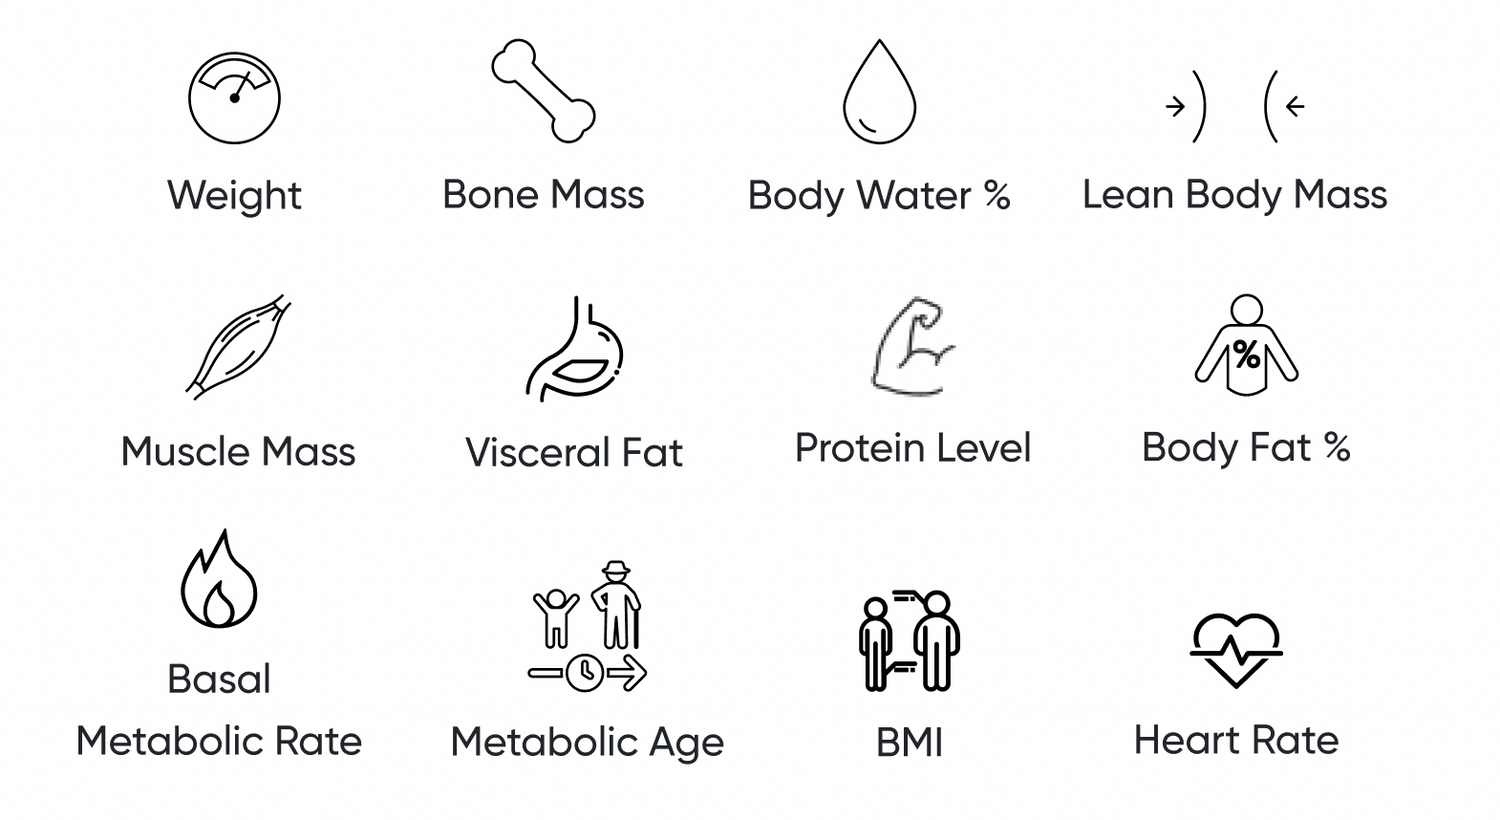 Scale metrics are weight, lean body mass, metabolic age, body fat %, muscle mass, bone mass, body water %, protein level, basal metabolic rate, BMI, visceral fat, and heart rate